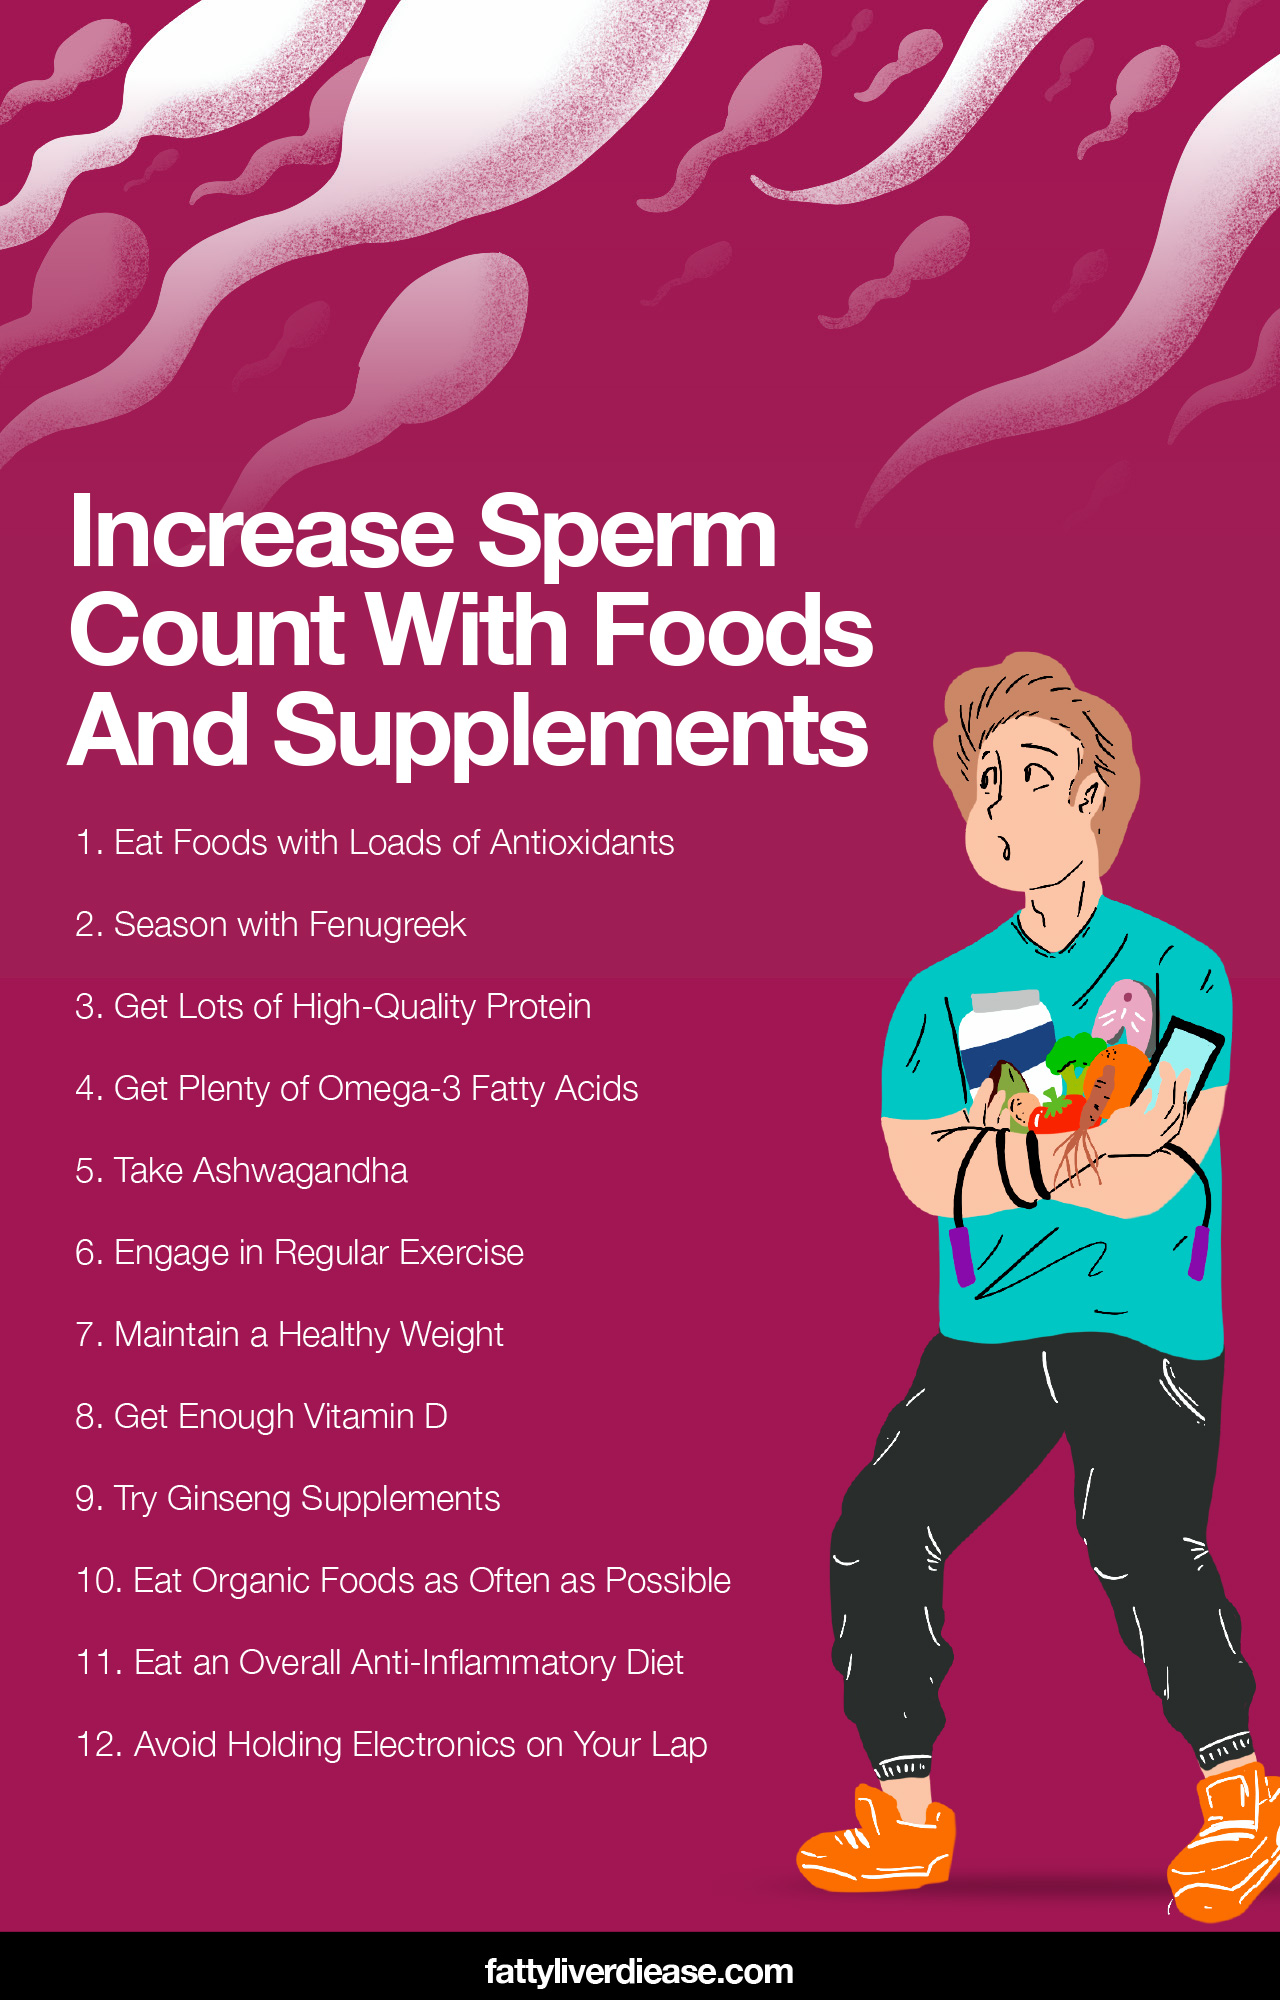 Increase Sperm Count With Foods And Supplements